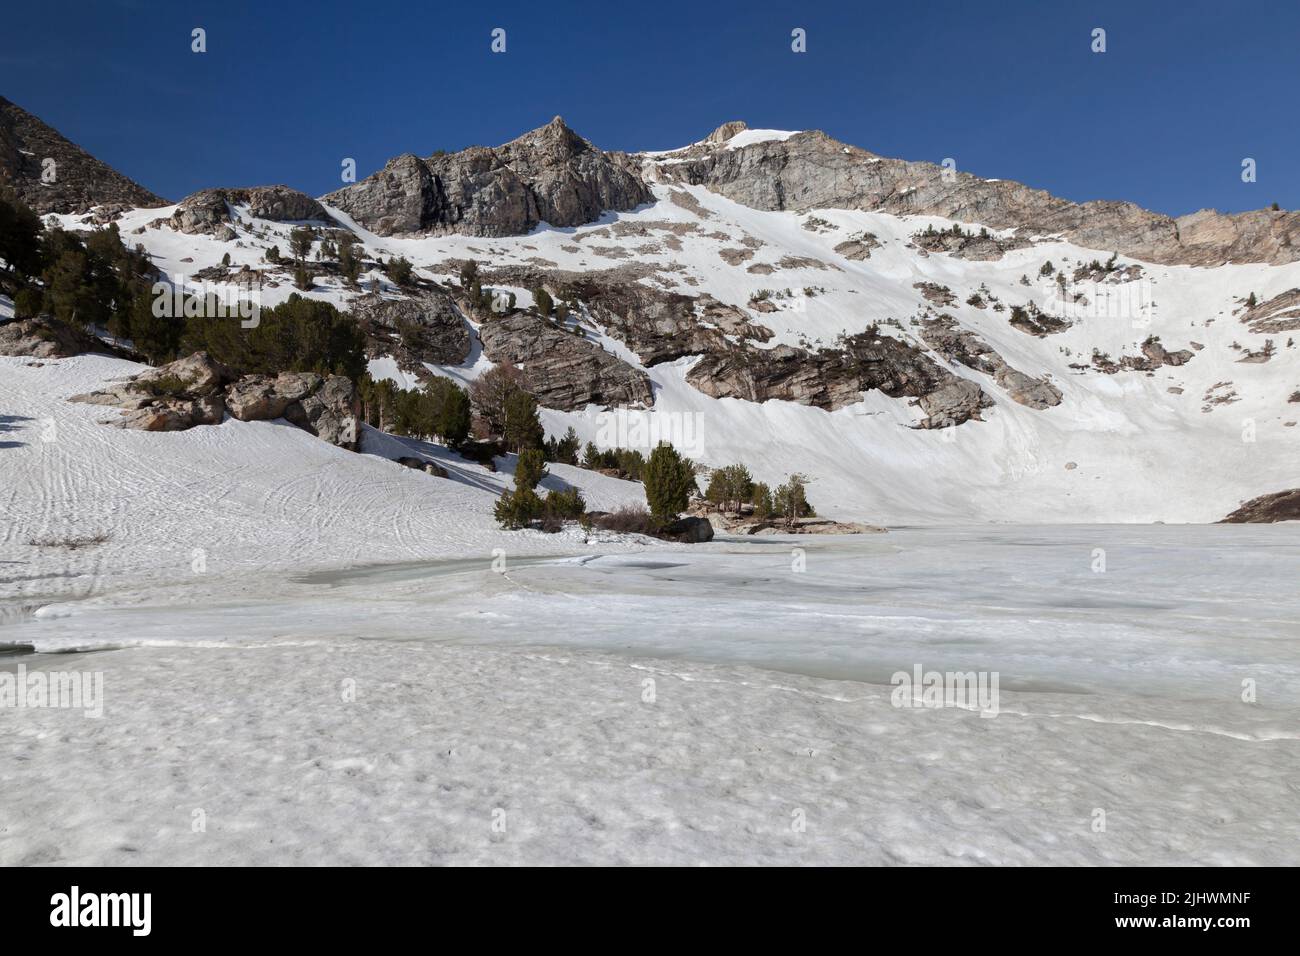 Frozen Lamoille Lake is a cirque at the headwaters of Lamoille Creek in Lamoille Canyon which is part of the Ruby Mountain Range in Nevada south of El Stock Photo